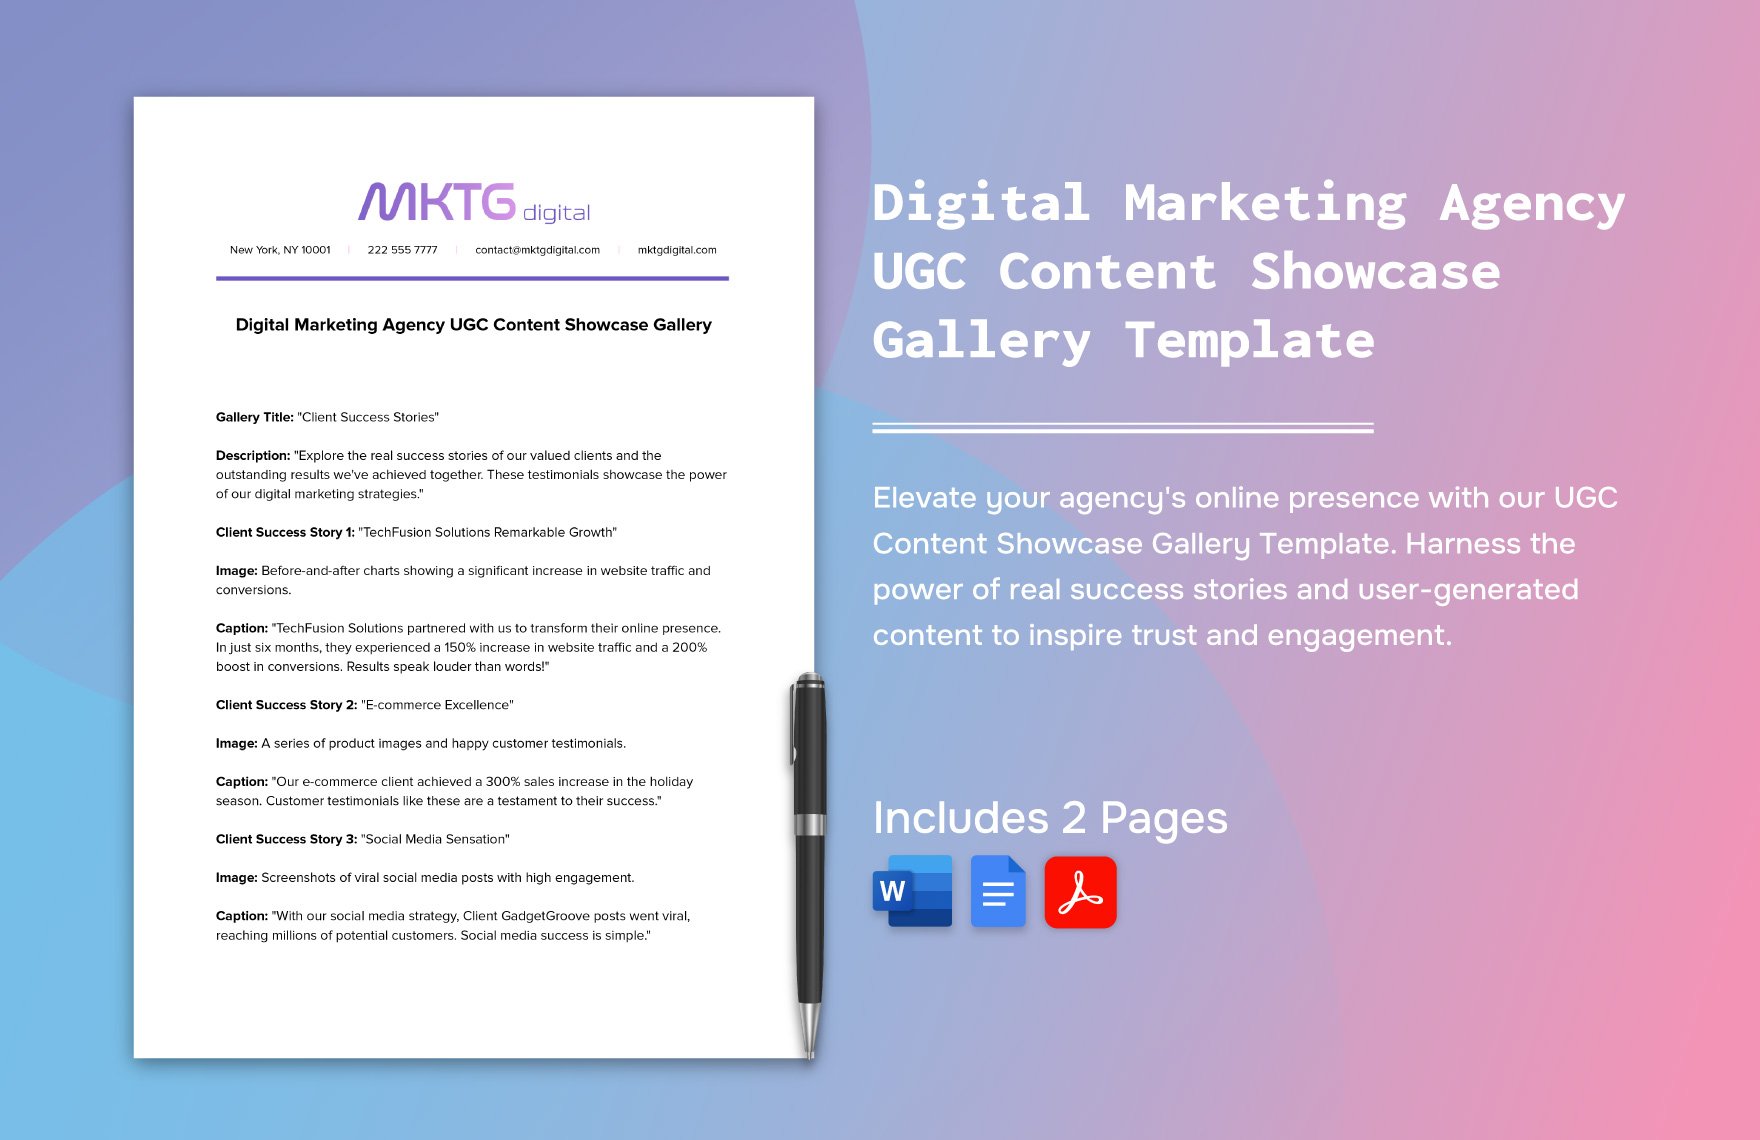 Digital Marketing Agency UGC Content Showcase Gallery Template